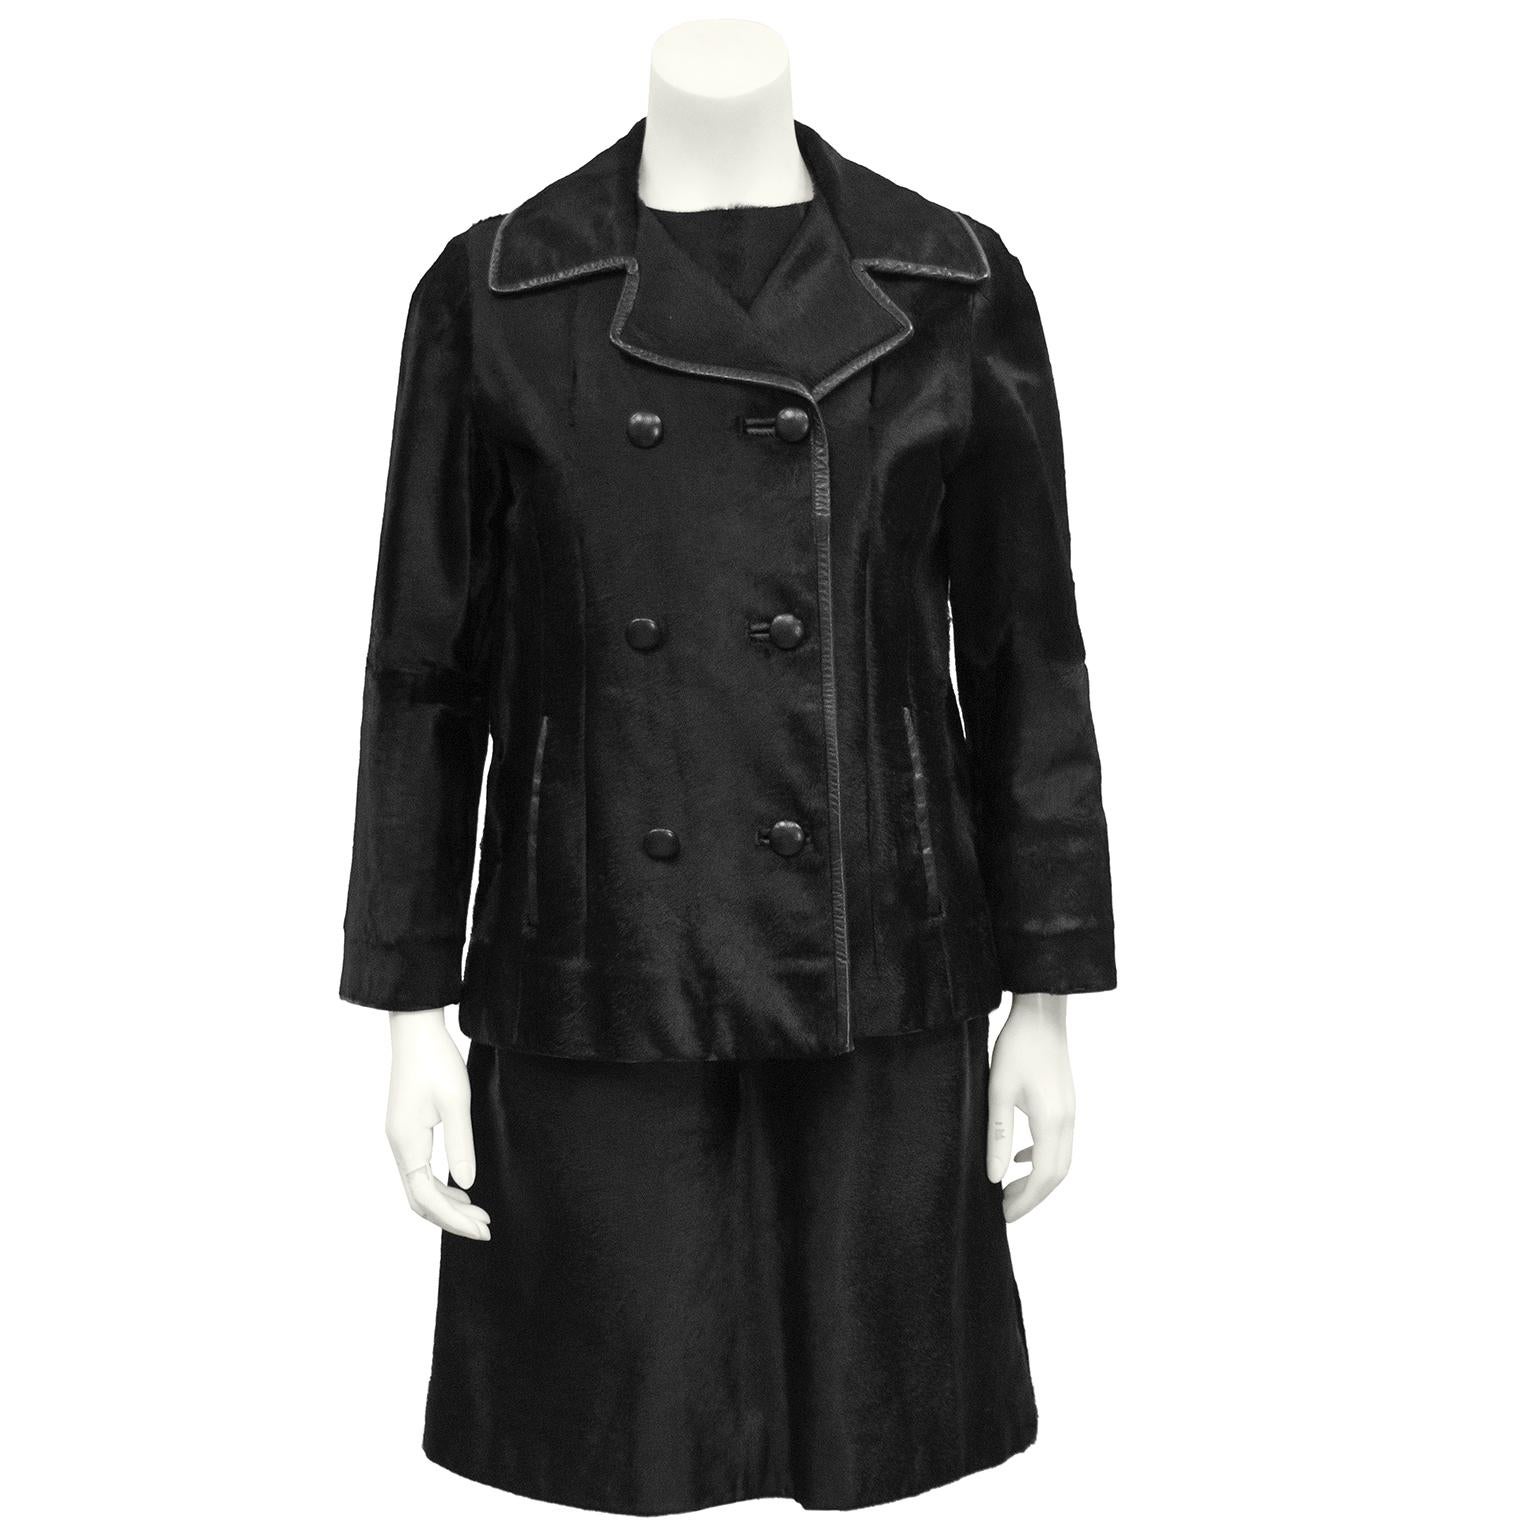 The classic dress and jacket with a twist. The sleeveless box fit shift dress has seams down the front and two front pockets. The matching Pea style jacket is double breasted with leather trim and side slit pockets. Bracelet length sleeves, in